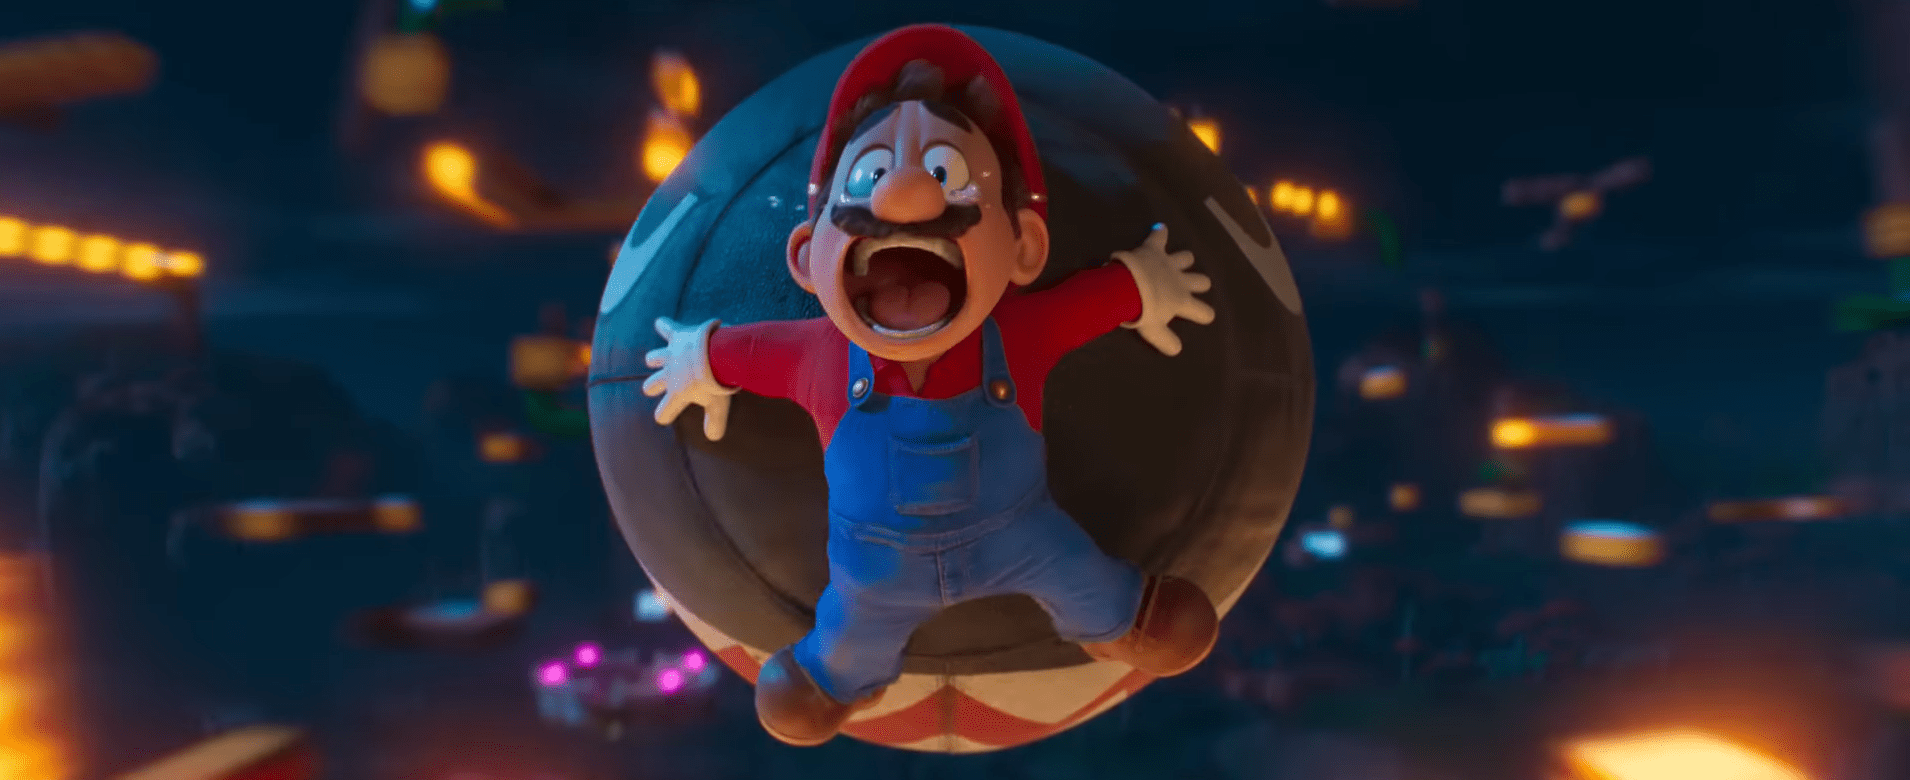 Super Mario Bros. Movie Is Getting Thumbs Up But There’s Bad News For Mobile Gamers